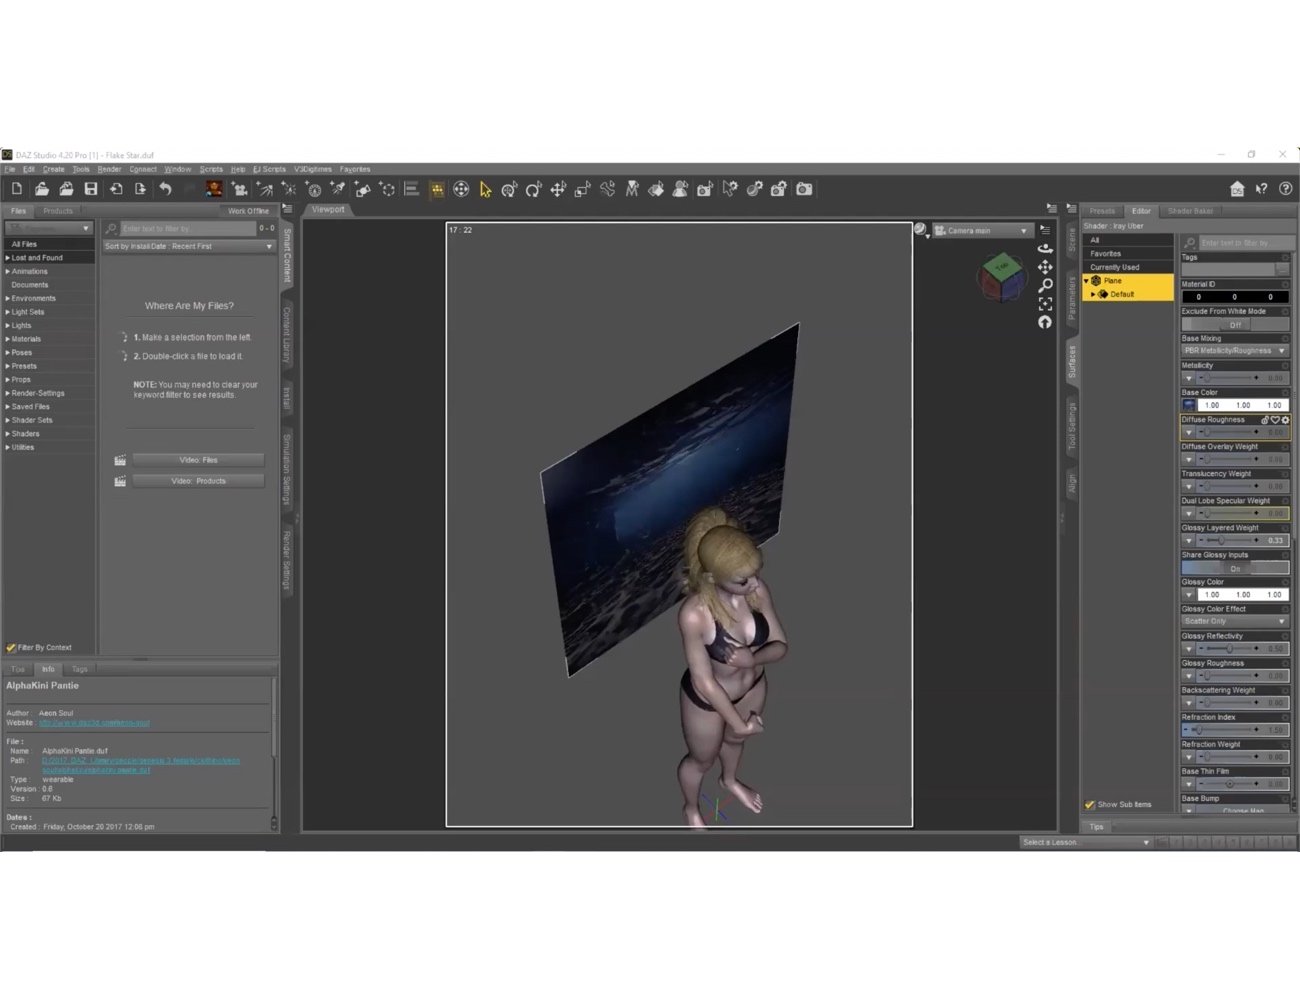 ABSTRACT: Compositing with Daz Studio by: Digital Art LiveGriffin Avid, 3D Models by Daz 3D